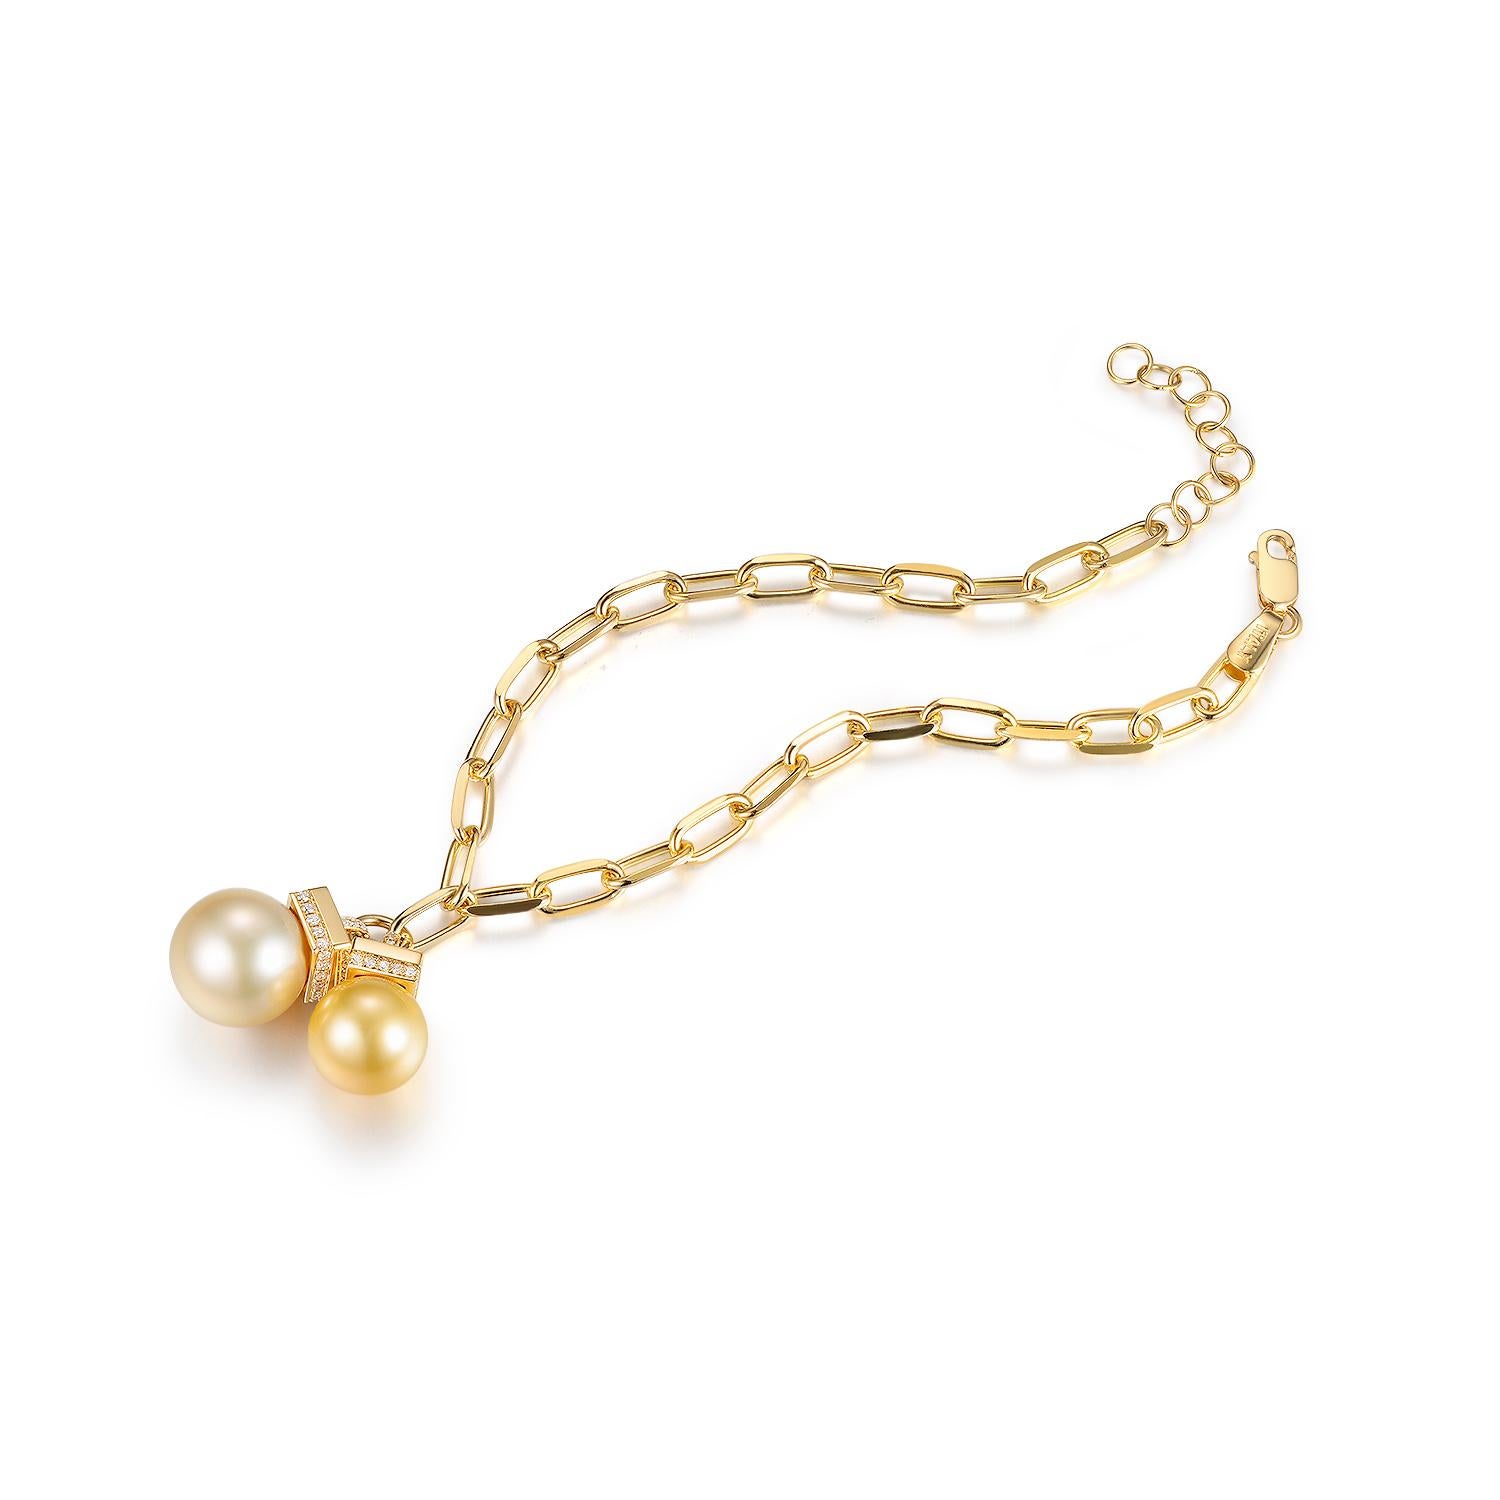 This bracelet is a timeless piece that exudes sophistication, crafted from the finest 18K yellow gold. It features two lustrous South Sea pearls, one measuring 9.5mm and the other 11.15mm, both renowned for their impressive size, smoothness, and the